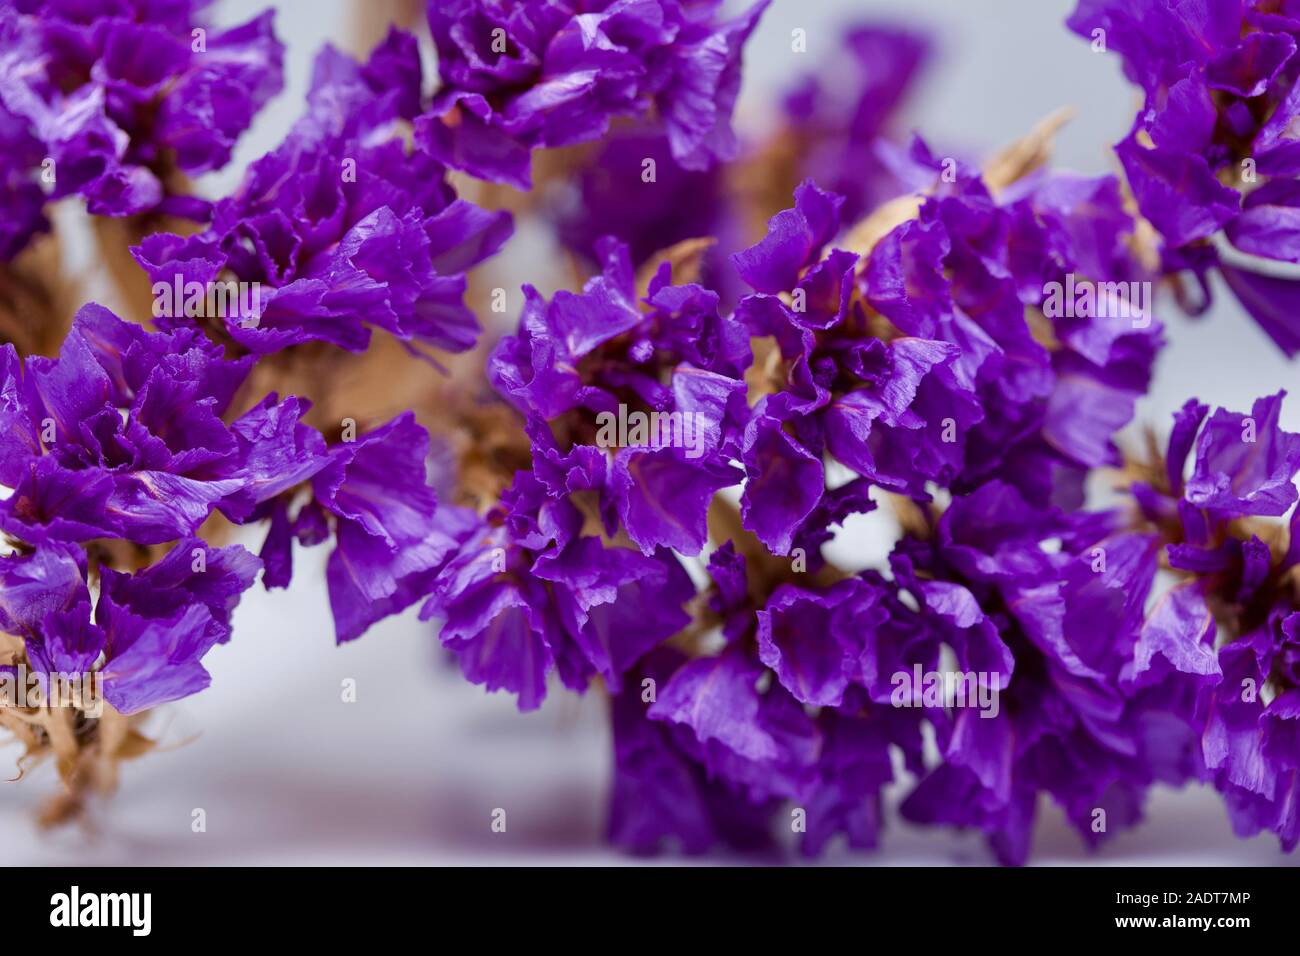 Macro abstract view of dried sea lavender (limonium) flower blossoms on a white background Stock Photo